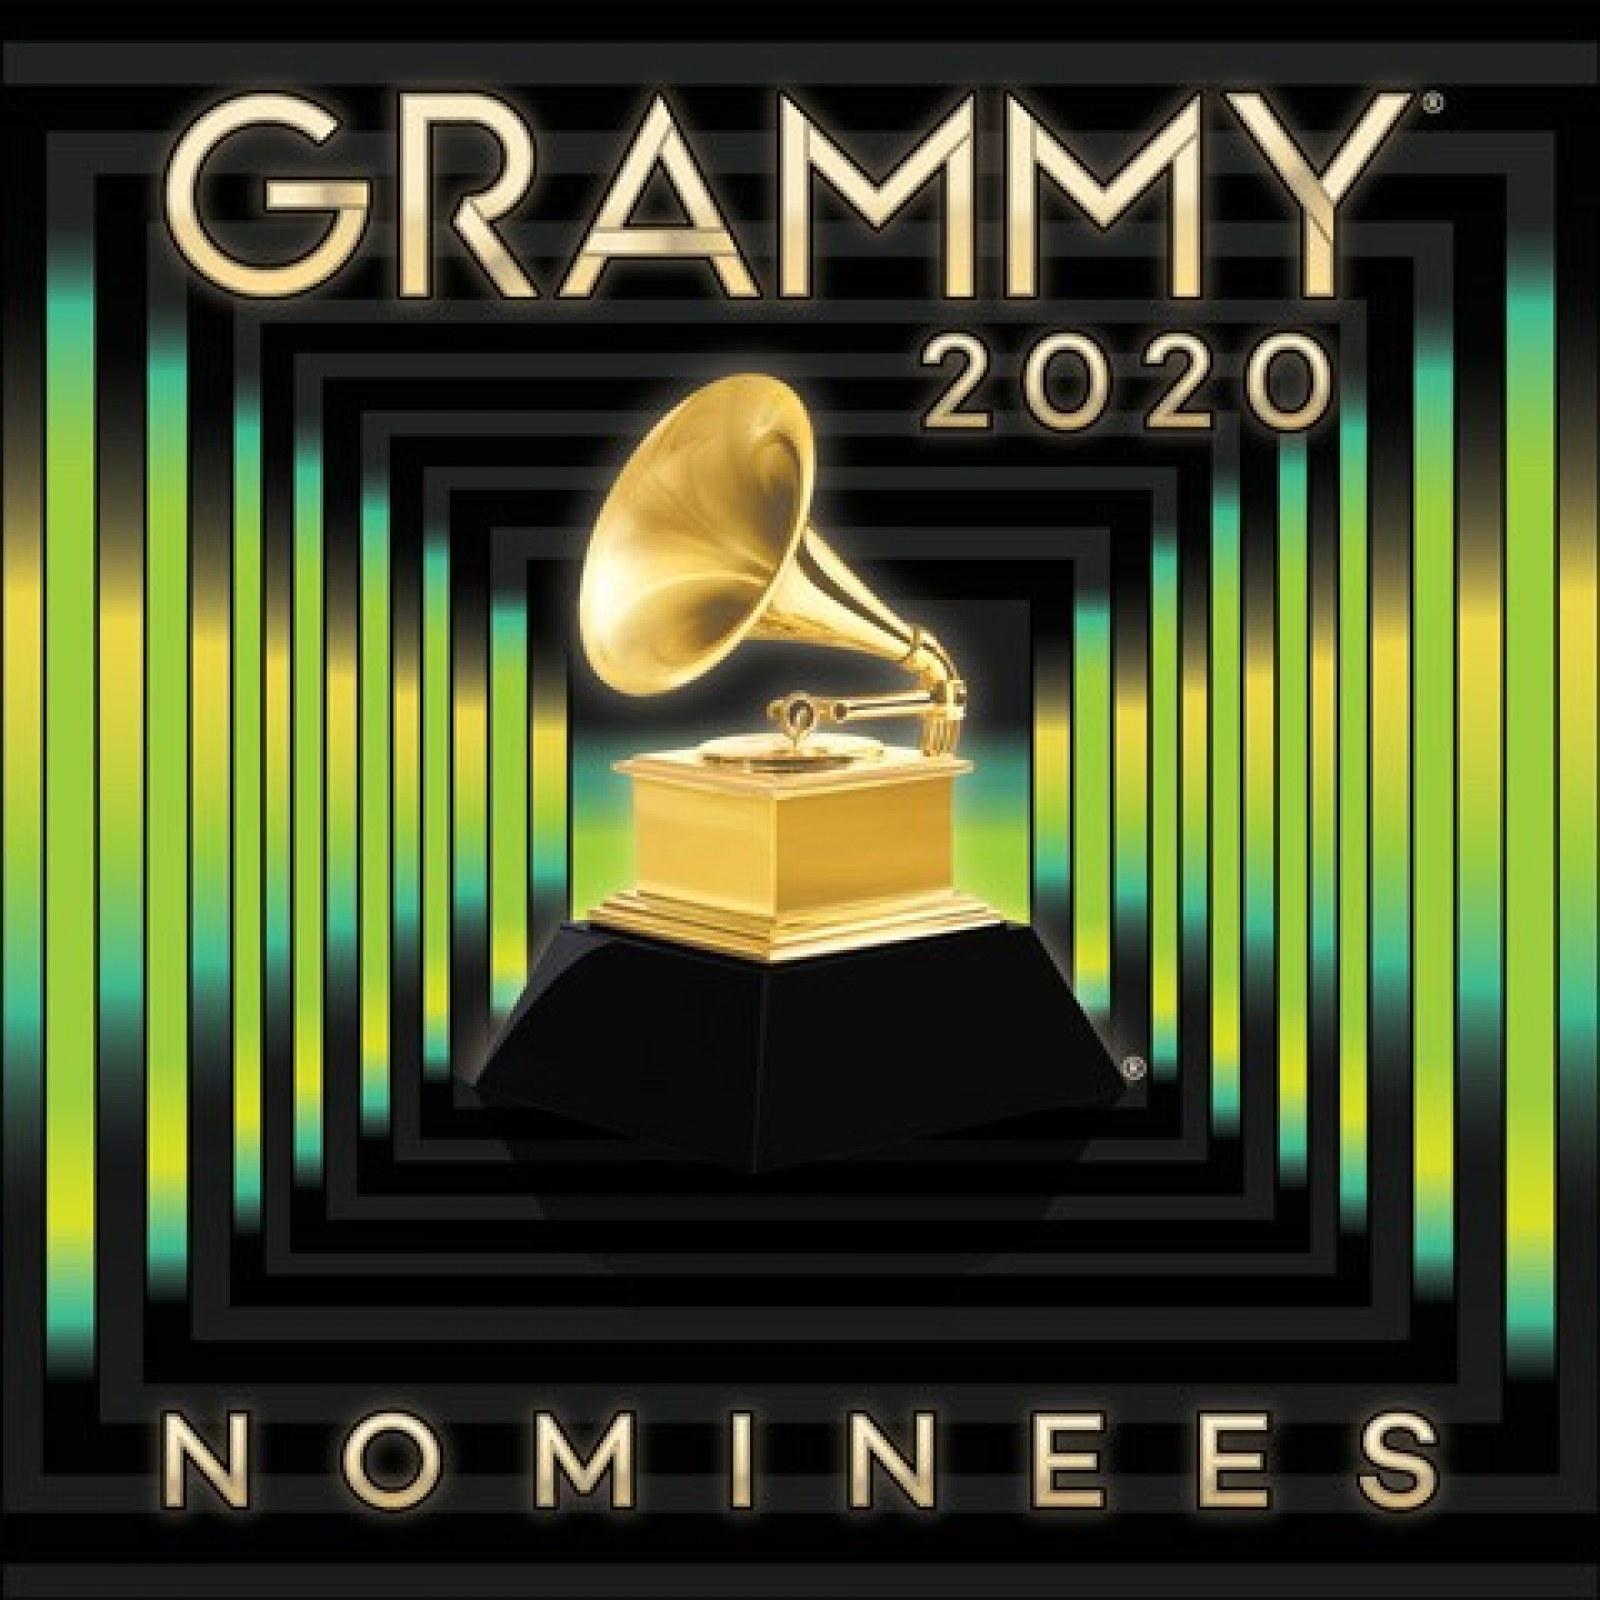 Grammy Nominations 2020: How to Watch, Live Stream